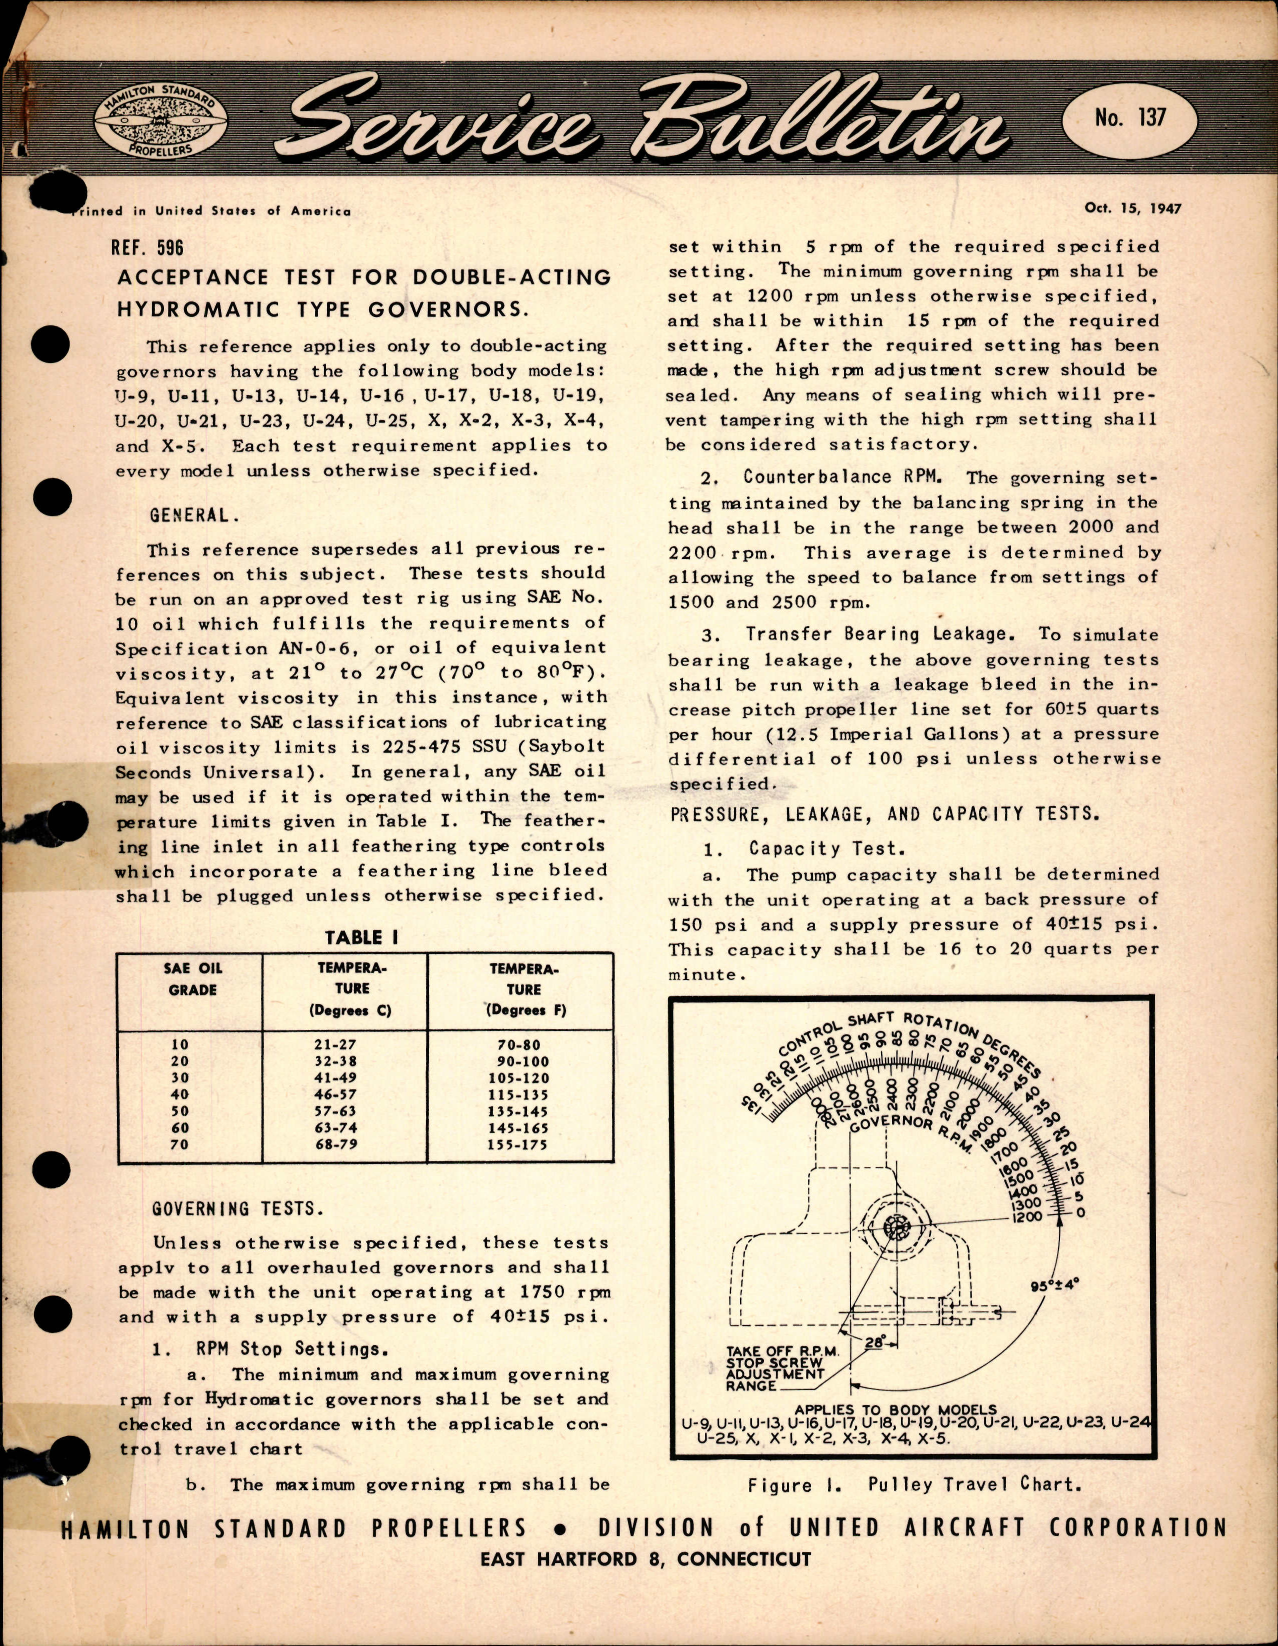 Sample page 1 from AirCorps Library document: Acceptance Test for Double-Acting Hydromatic Type Governors, Ref 596